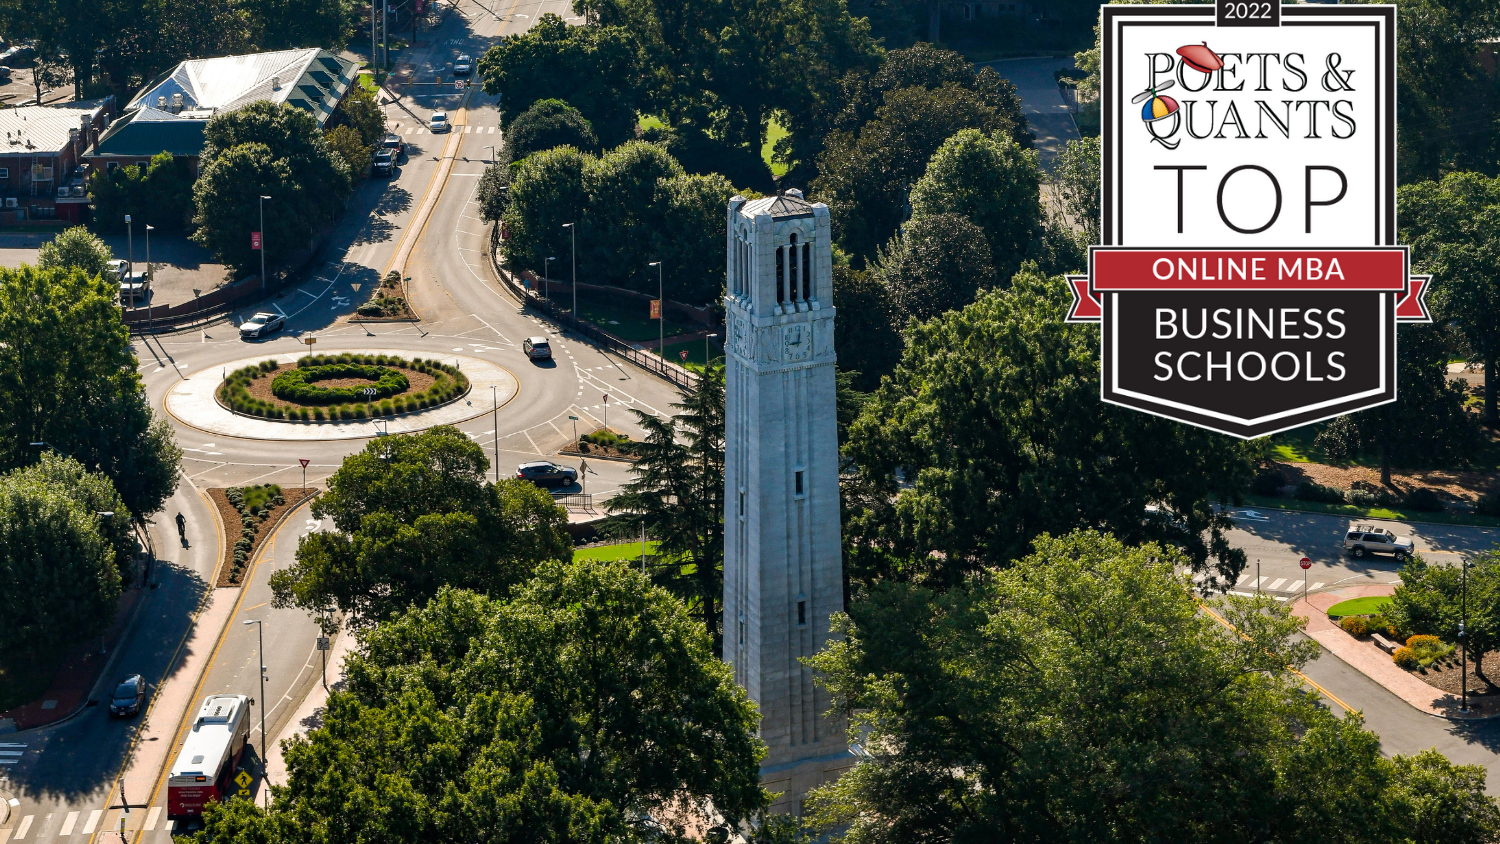 Belltower aerial photo with "Poets & Quants top online MBA business schools" badge.